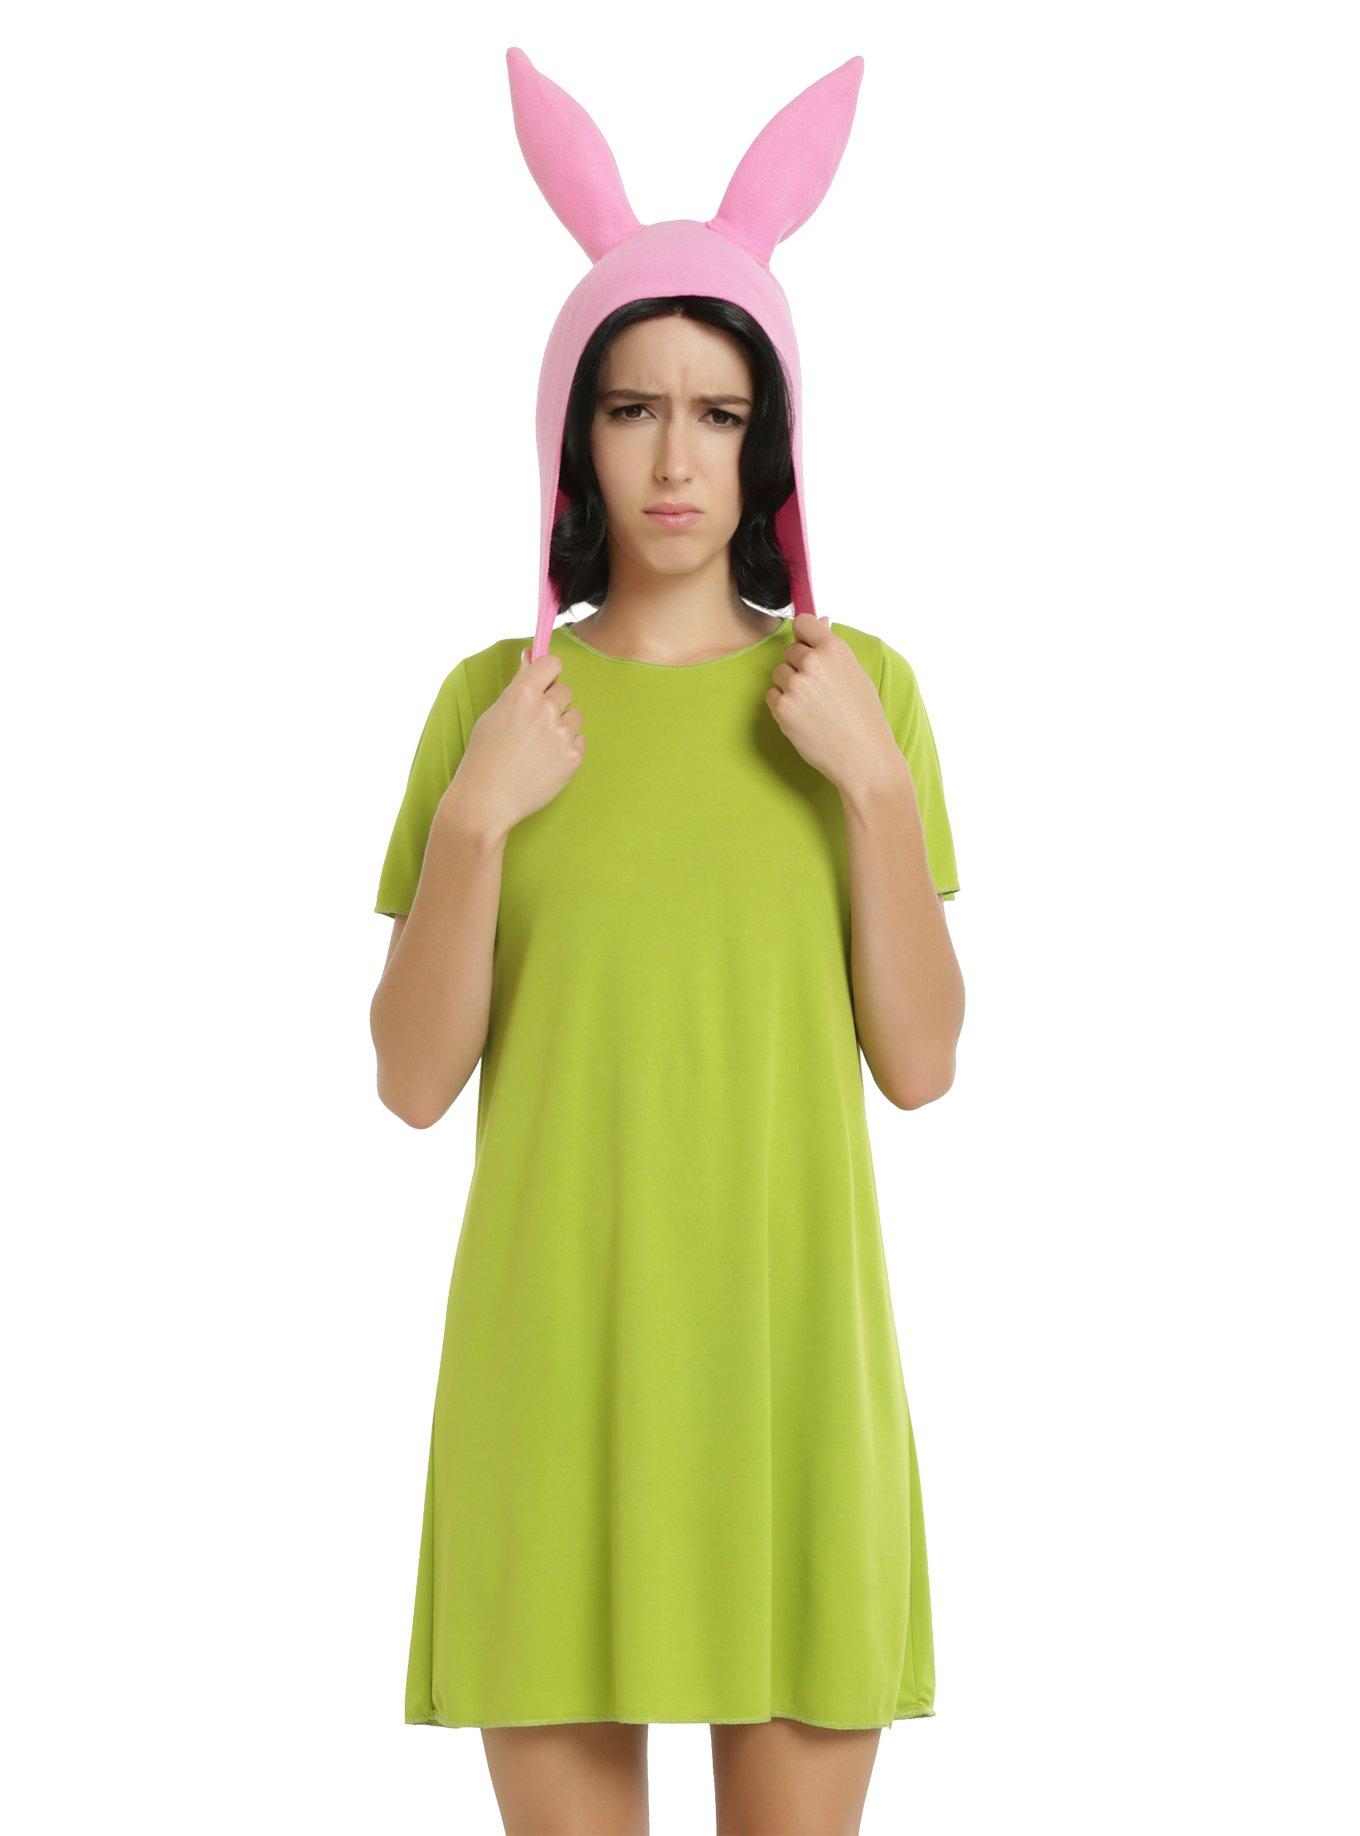 Neon Green Dog Graphic T-Shirt Dress for Sale by Kelly Louise